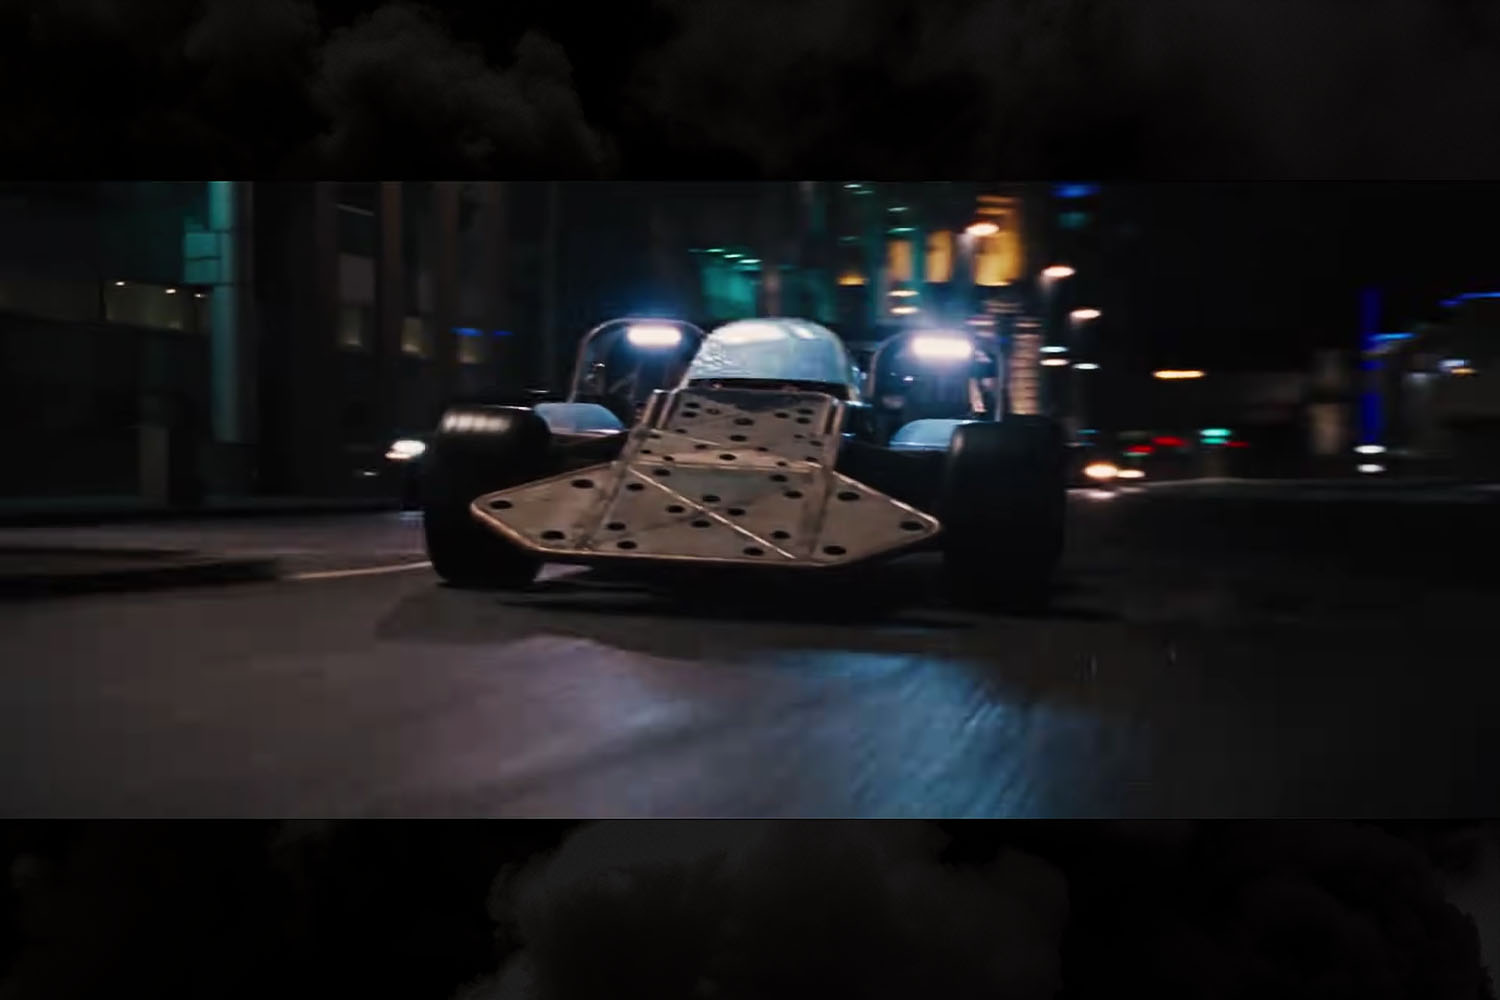 The infamous Flip Car driven by Owen Shaw (Luke Evans) and Vegh (Clara Paget) in Fast & Furious 6